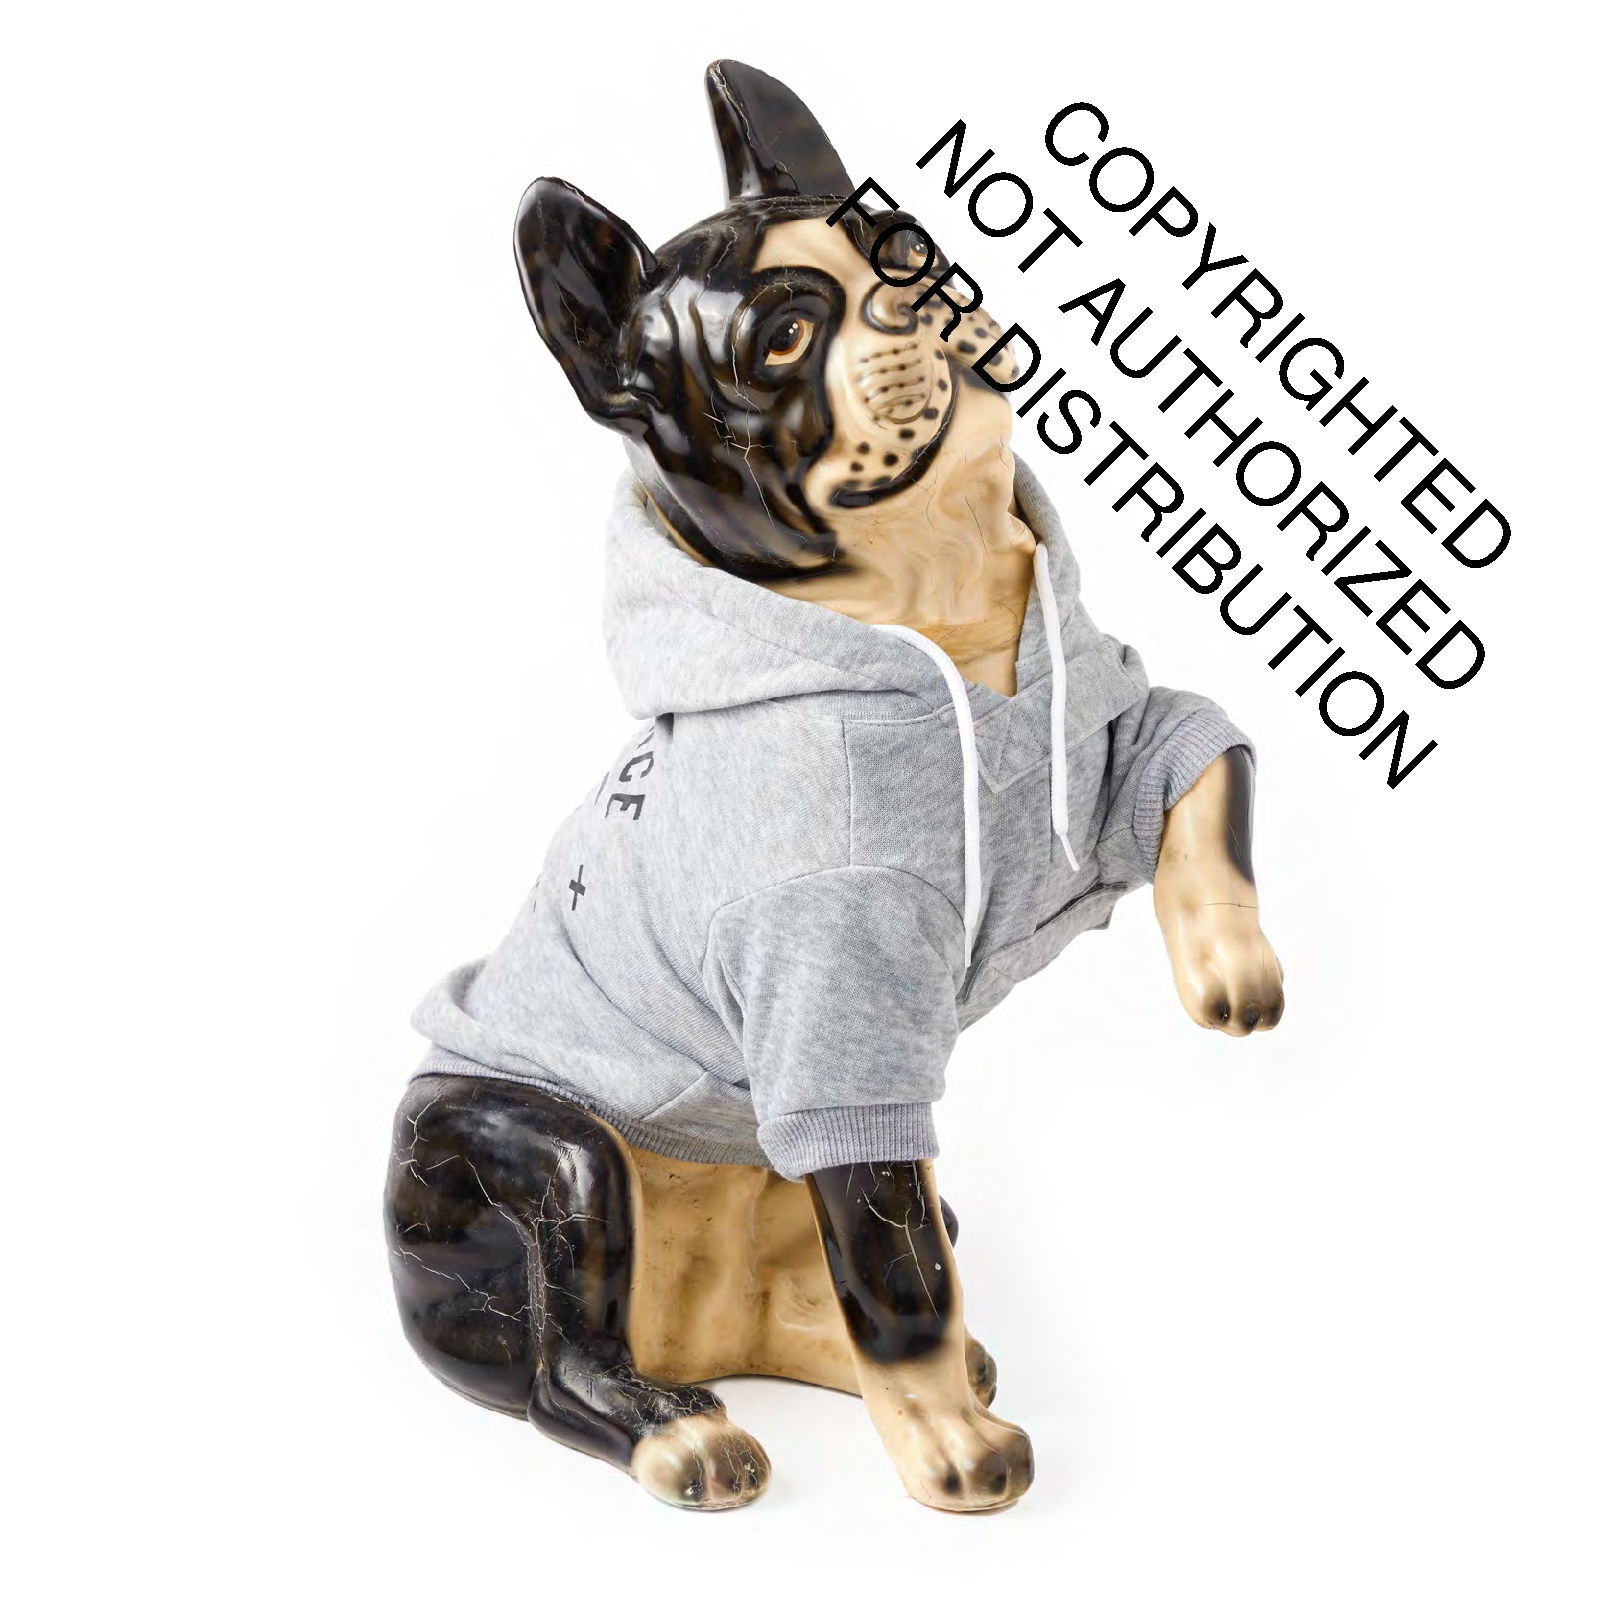 Obedience School Dropout Dog Hoodie - XS